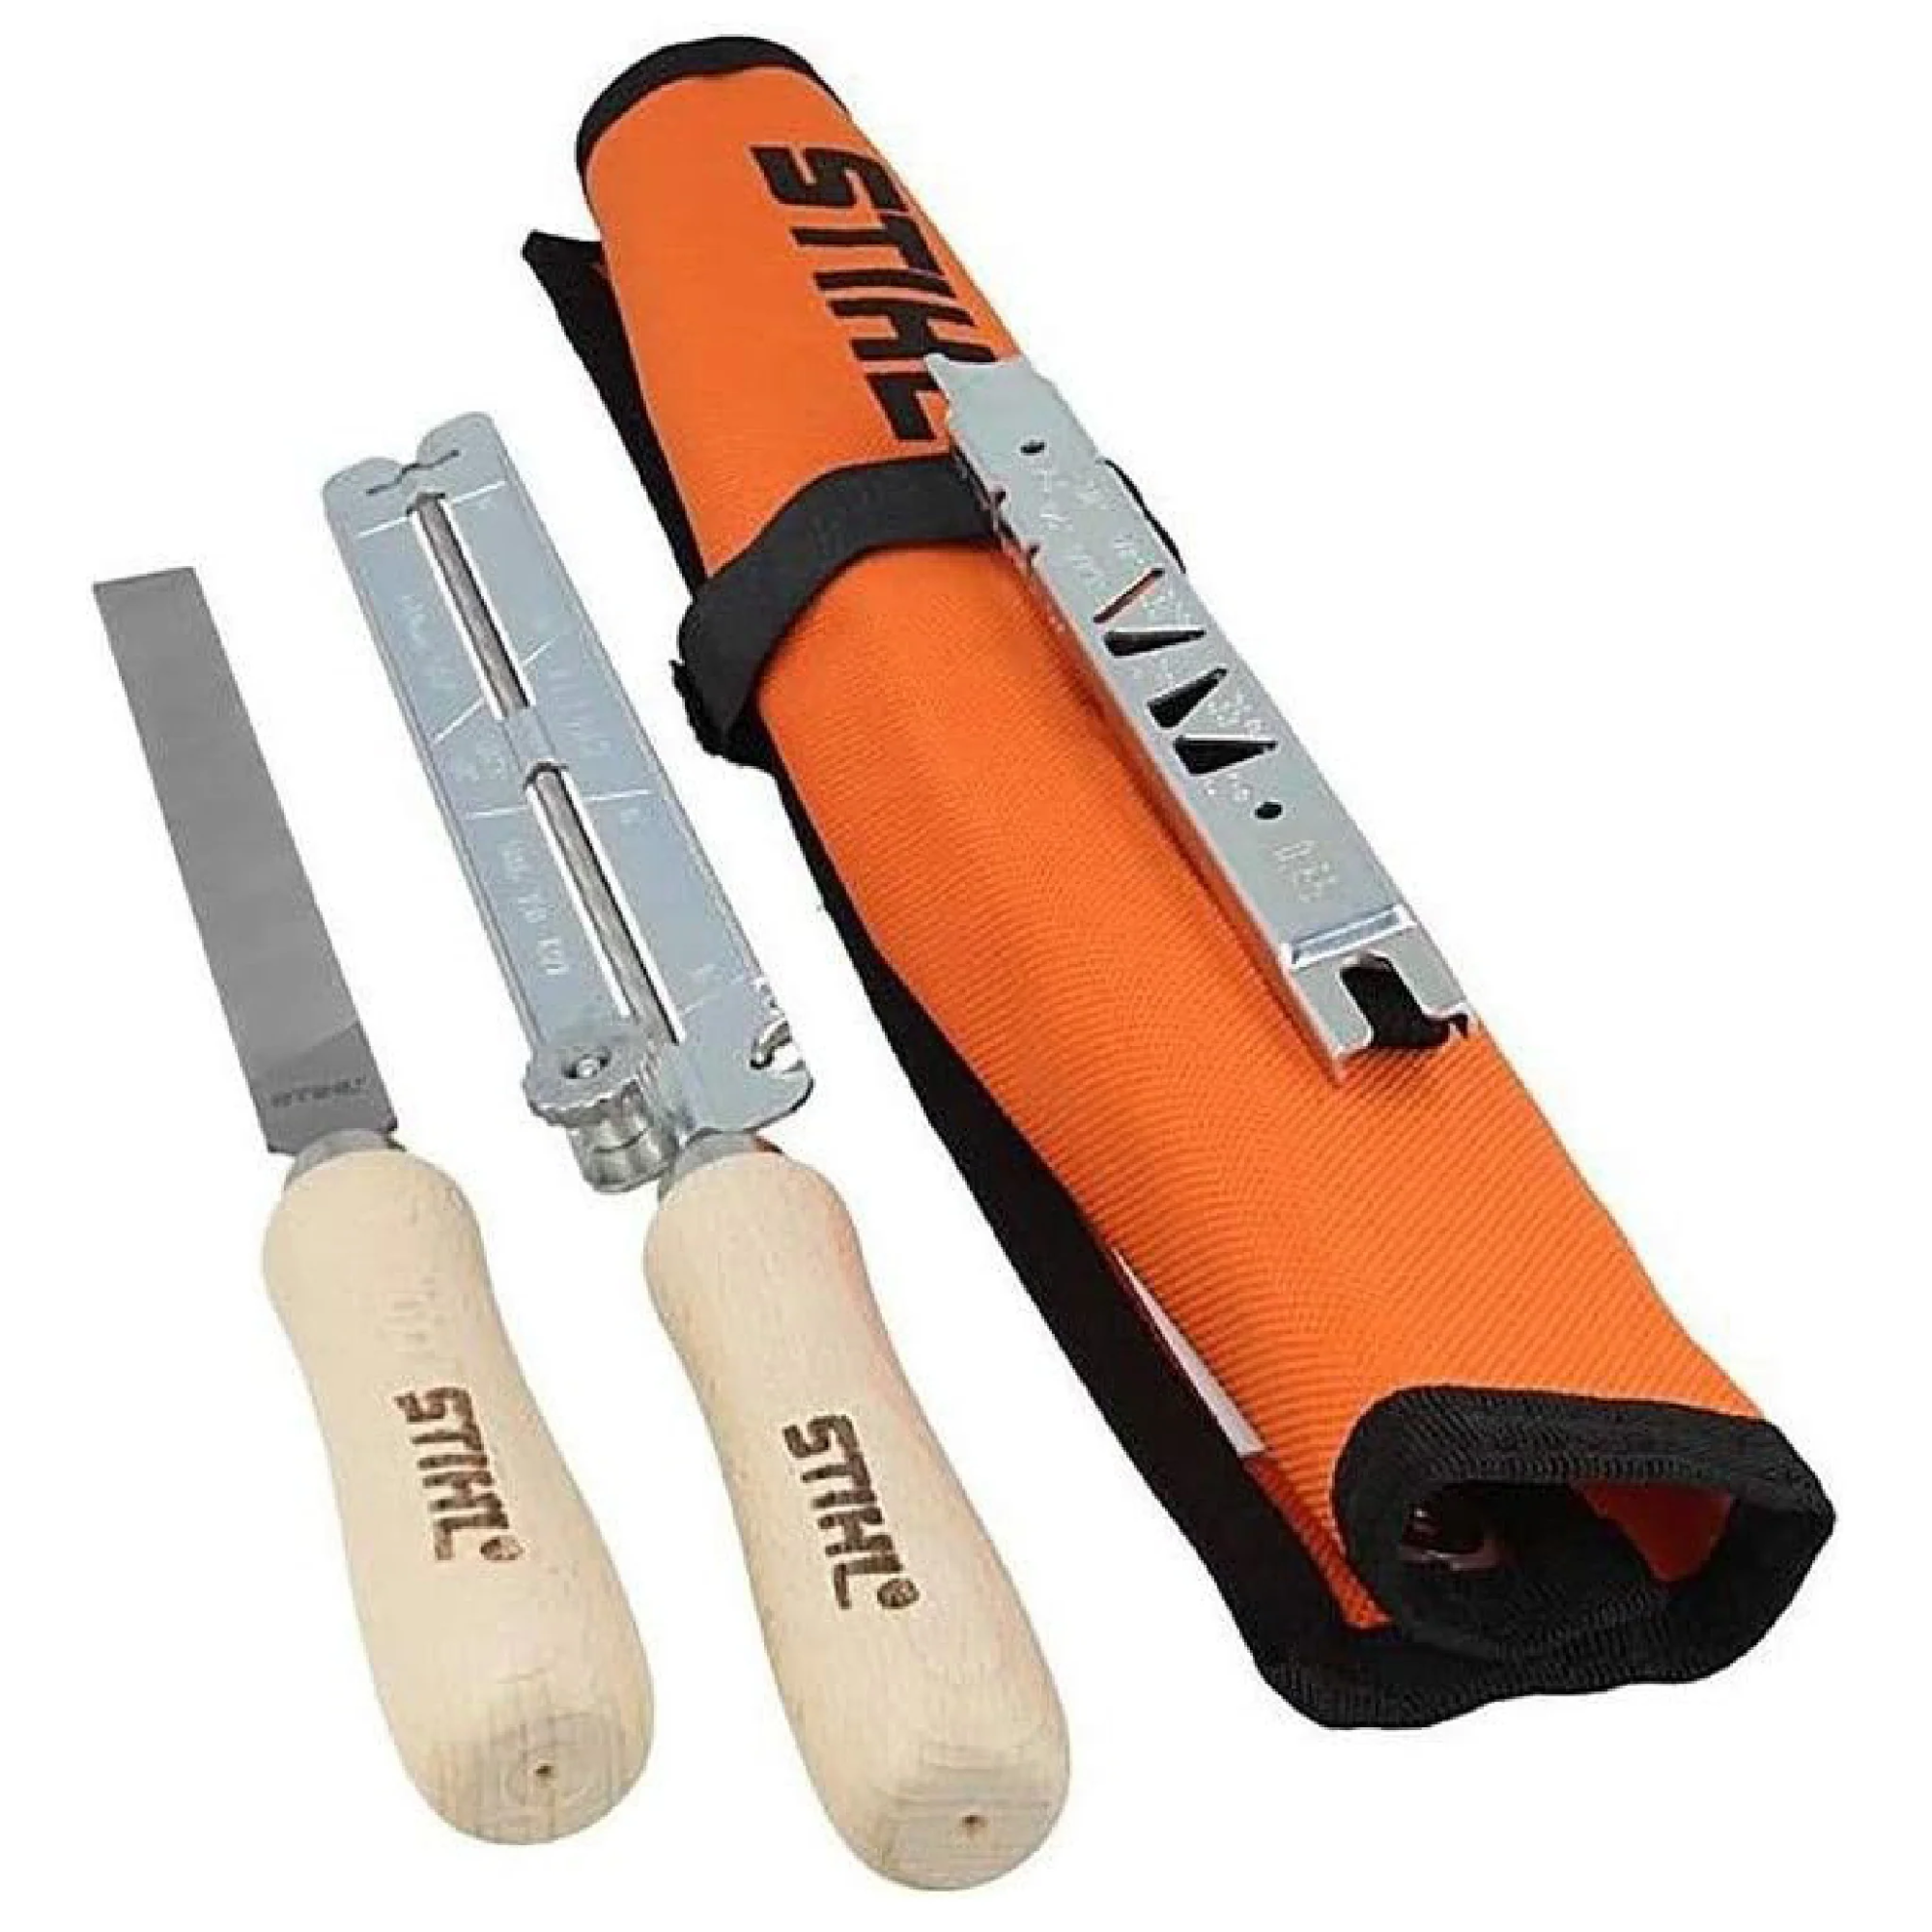 STIHL Complete Saw Chain Filing Kit For 1/4-Inch and 3/8-Inch, 5/32-Inch | 5605 007 1027